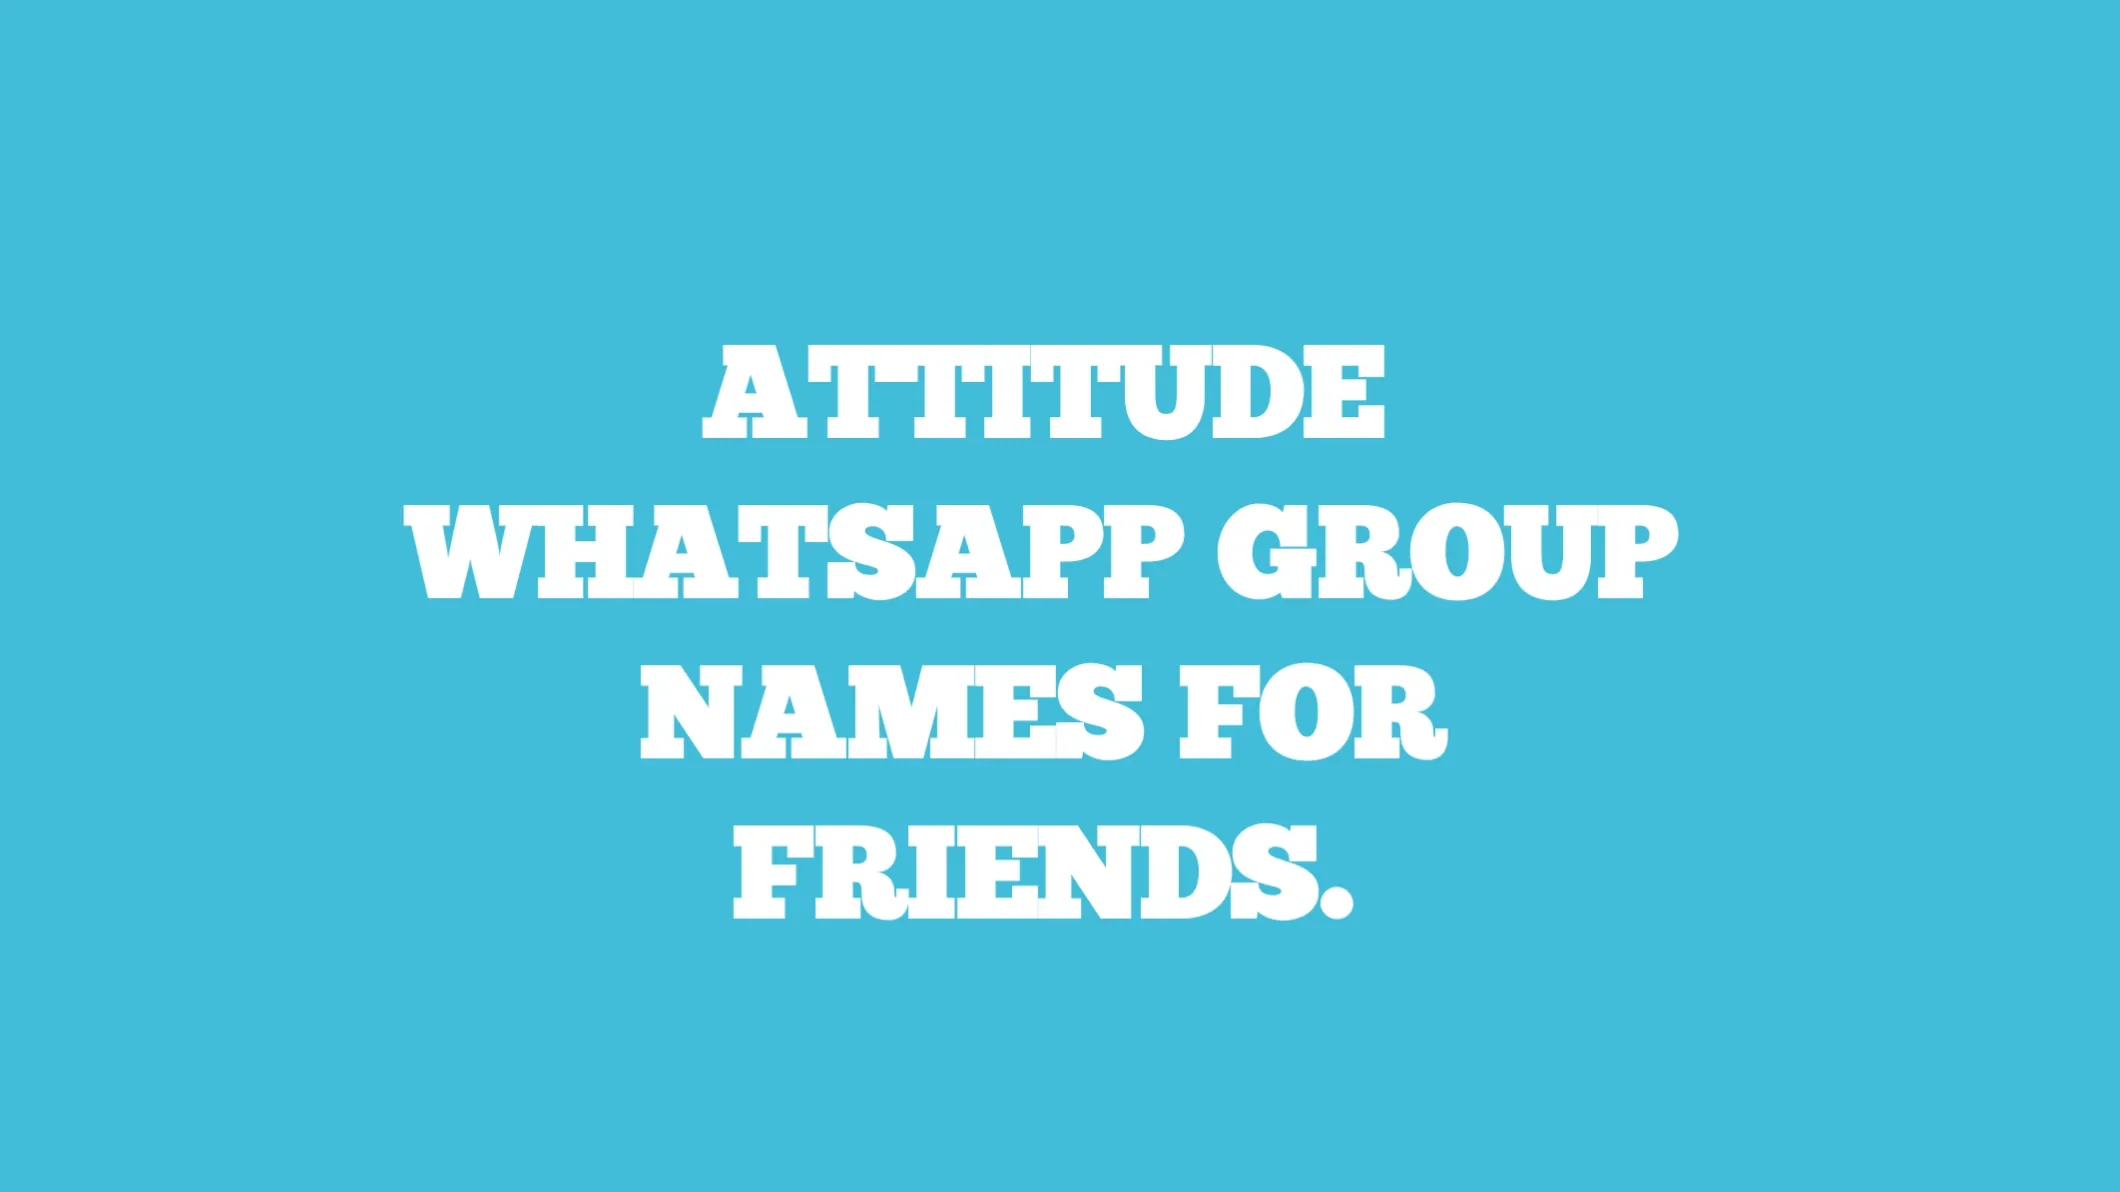 Attitude whatsapp group names for friends.